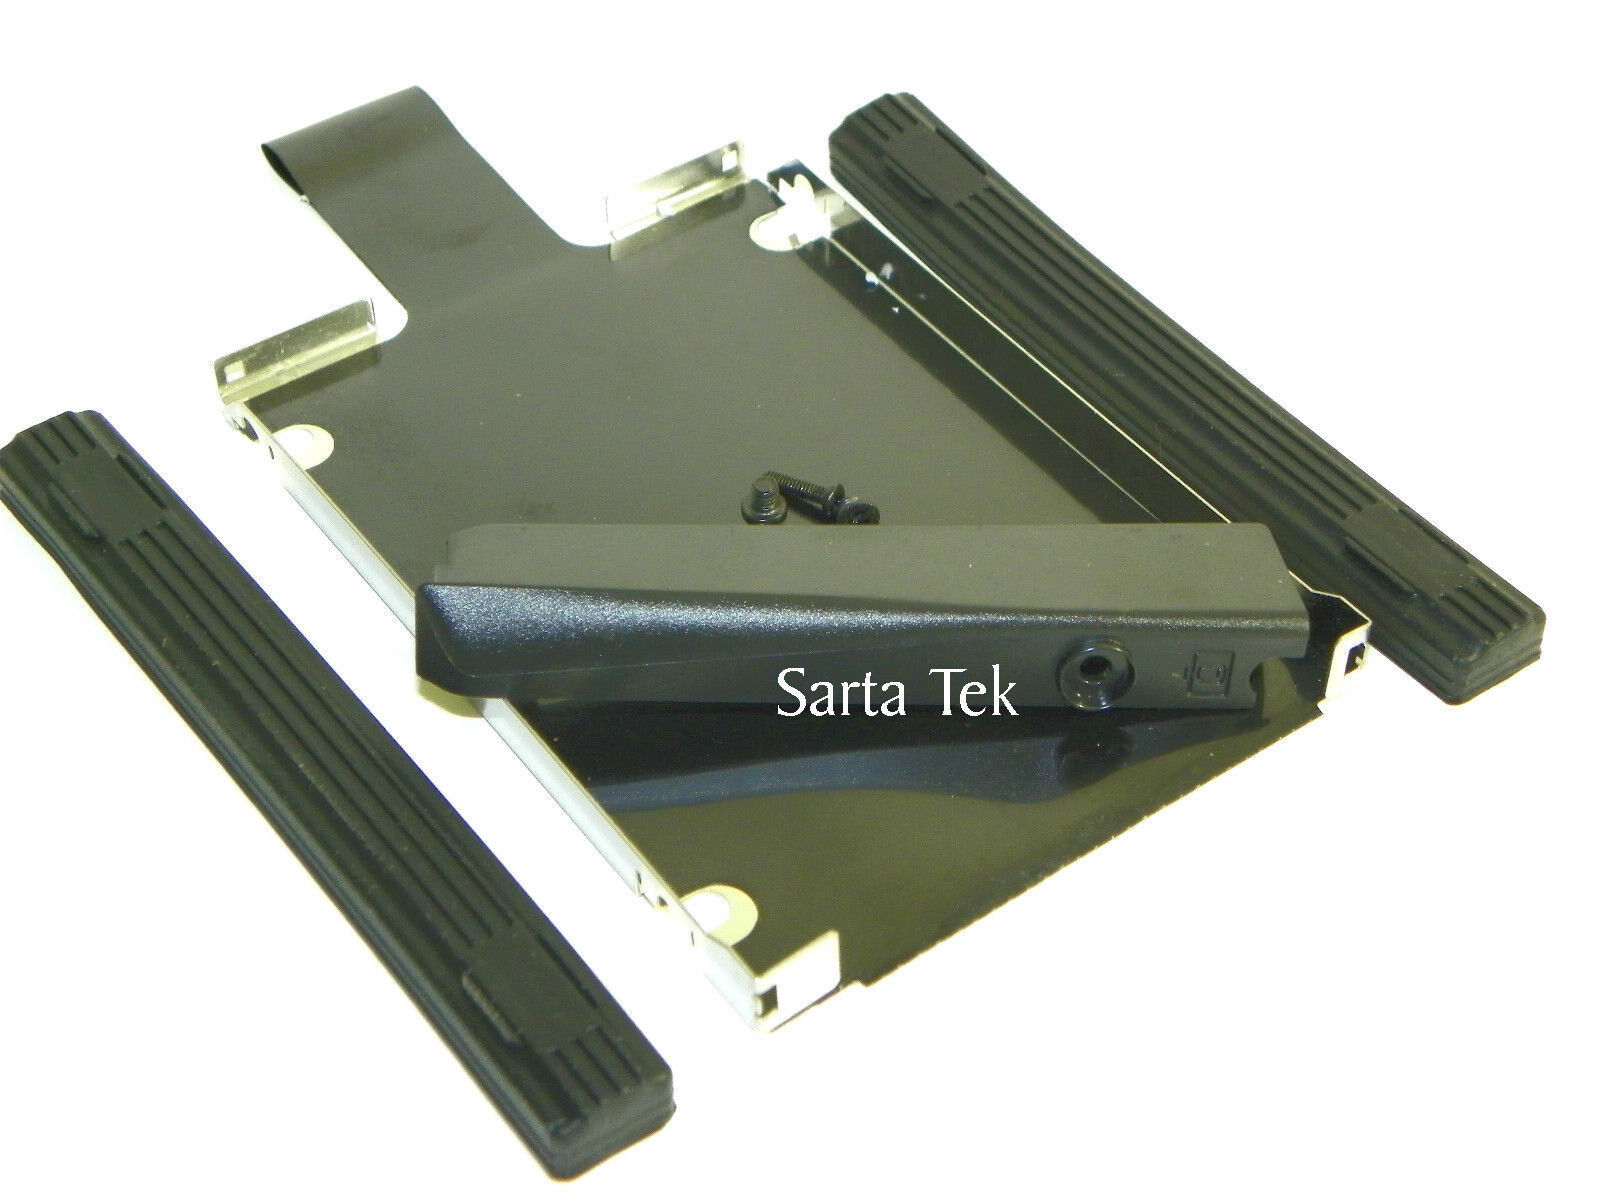 IBM Lenovo T61 T61P R61 Hard Drive Caddy 14" Wide screen Complete Kit New - $21.99